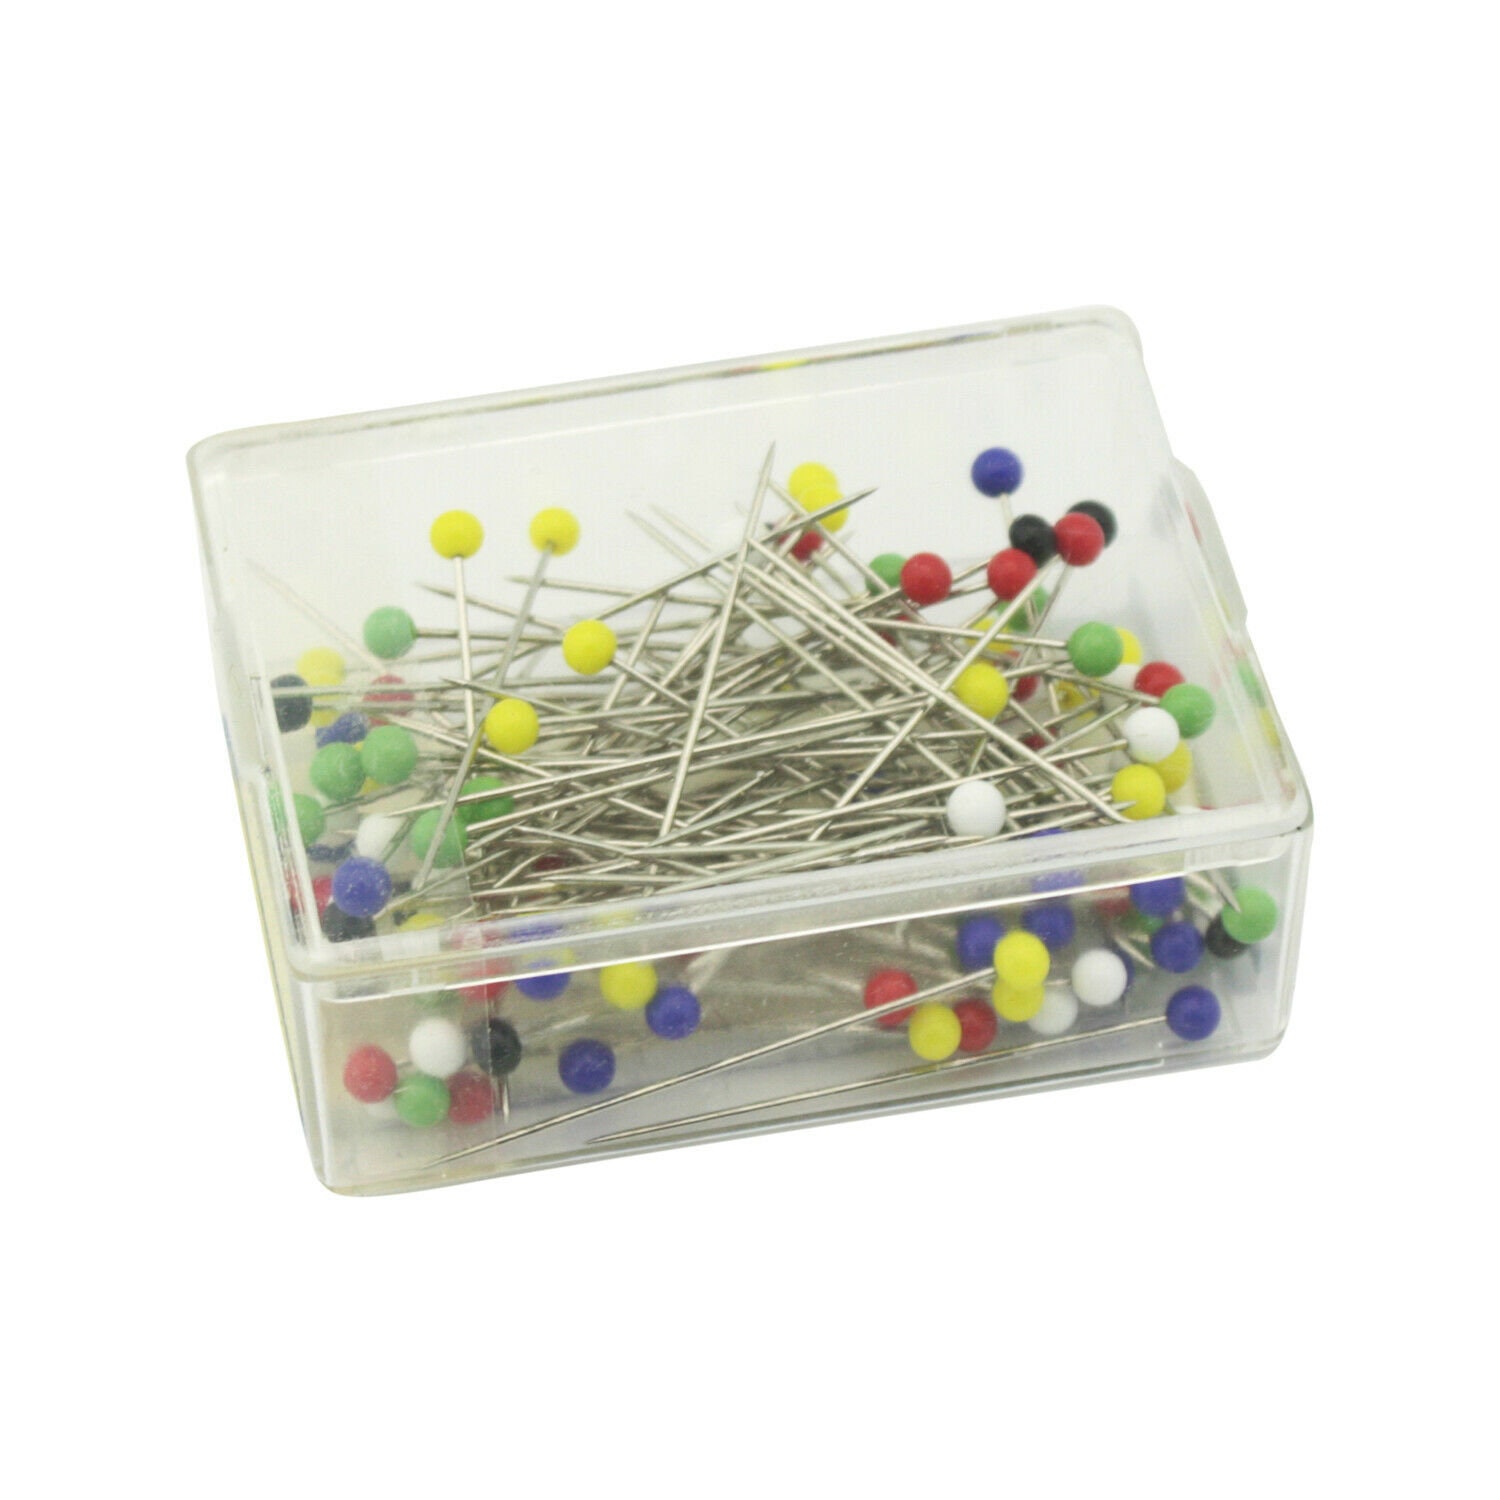 Glass Head Pins - #20 - 1 1/4 x 0.023 - 40/Pack - Assorted